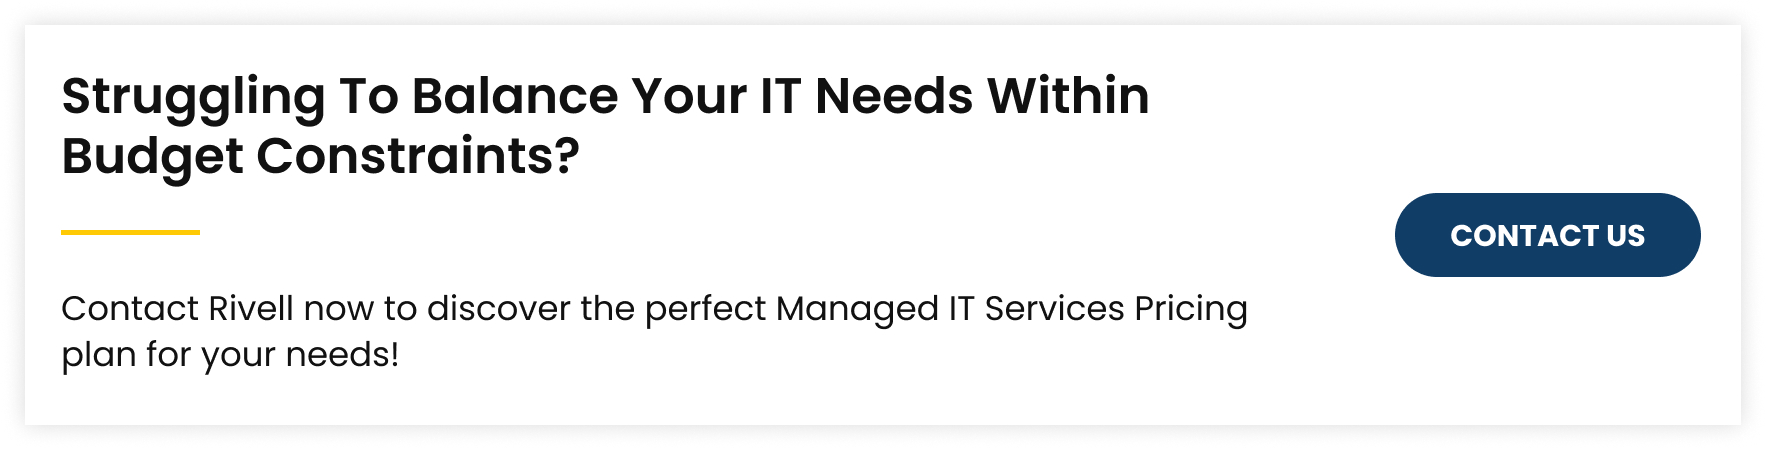 Contact us for managed it services pricing